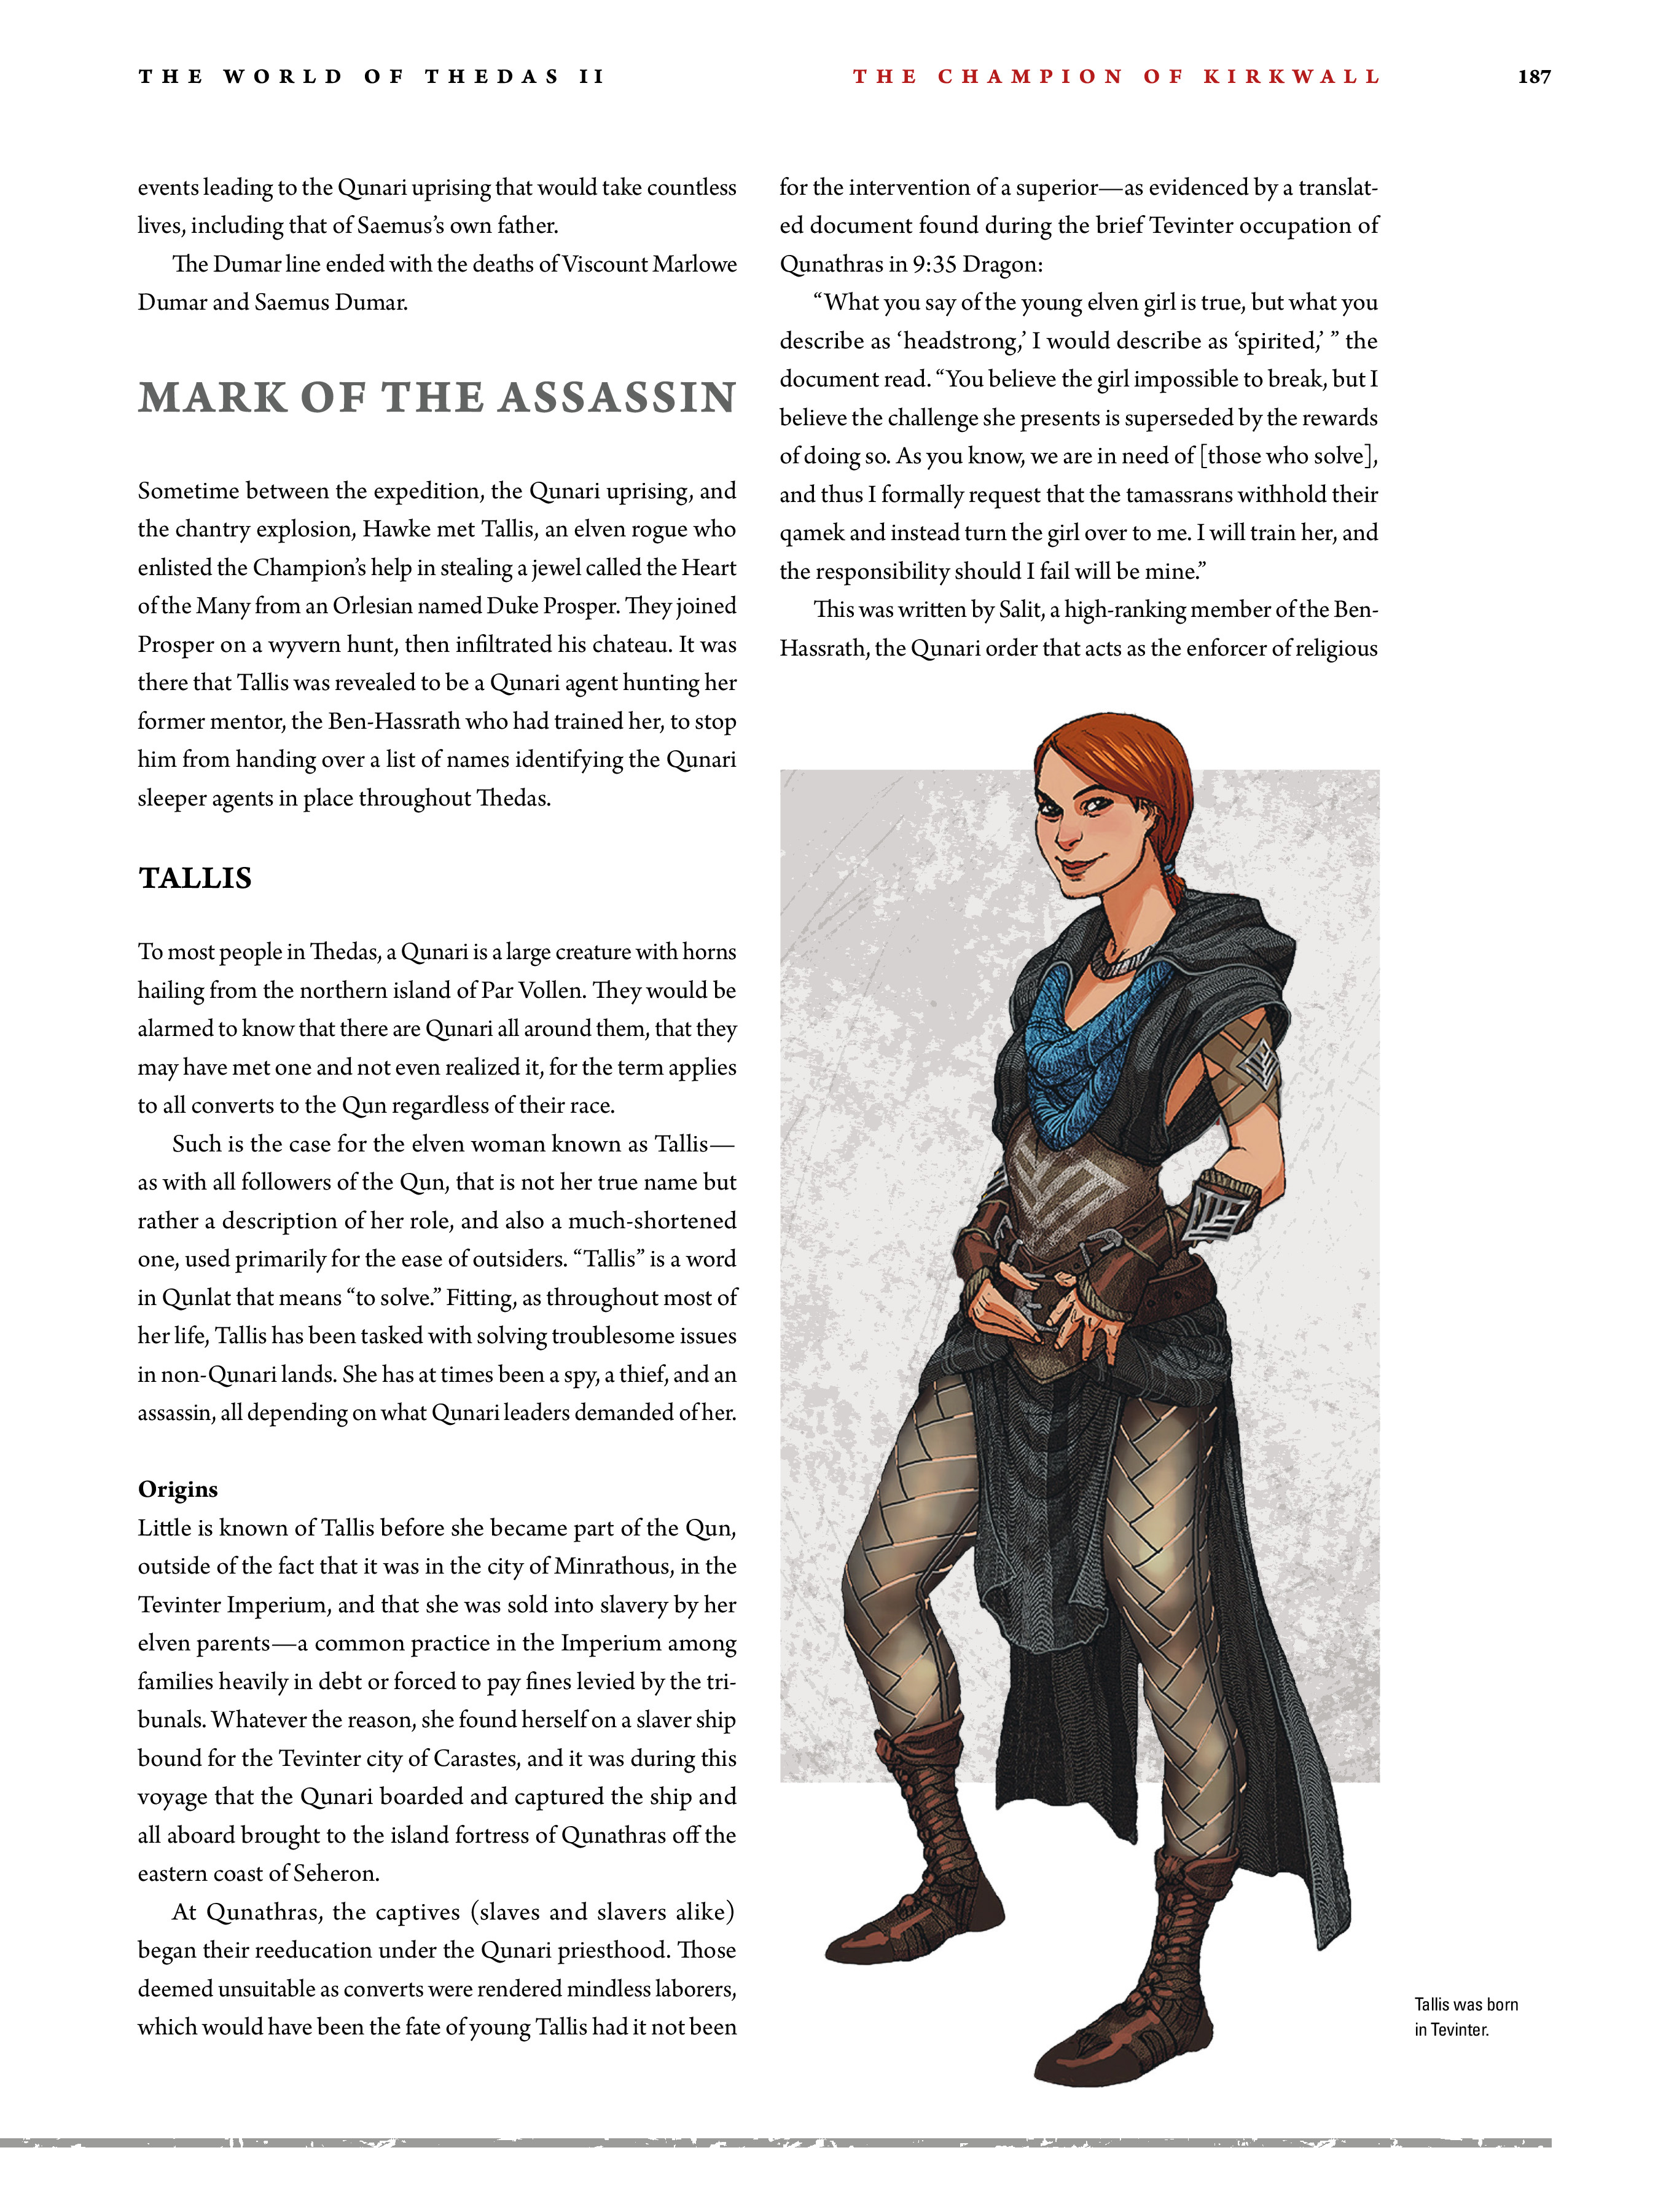 Read online Dragon Age: The World of Thedas comic -  Issue # TPB 2 - 182